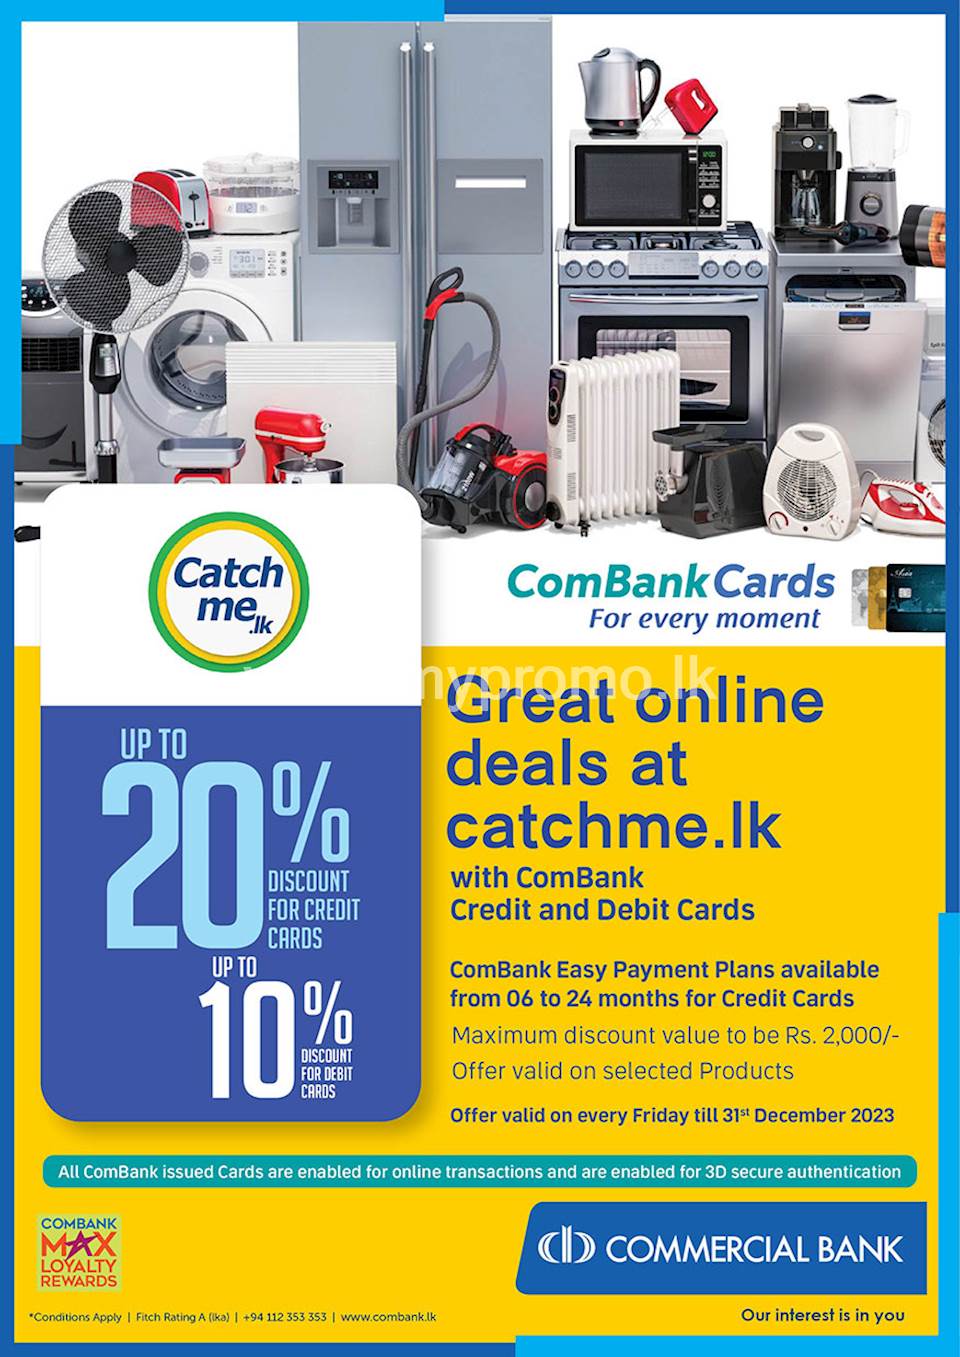 Great online deals at catchme.lk with ComBank Credit and Debit Cards